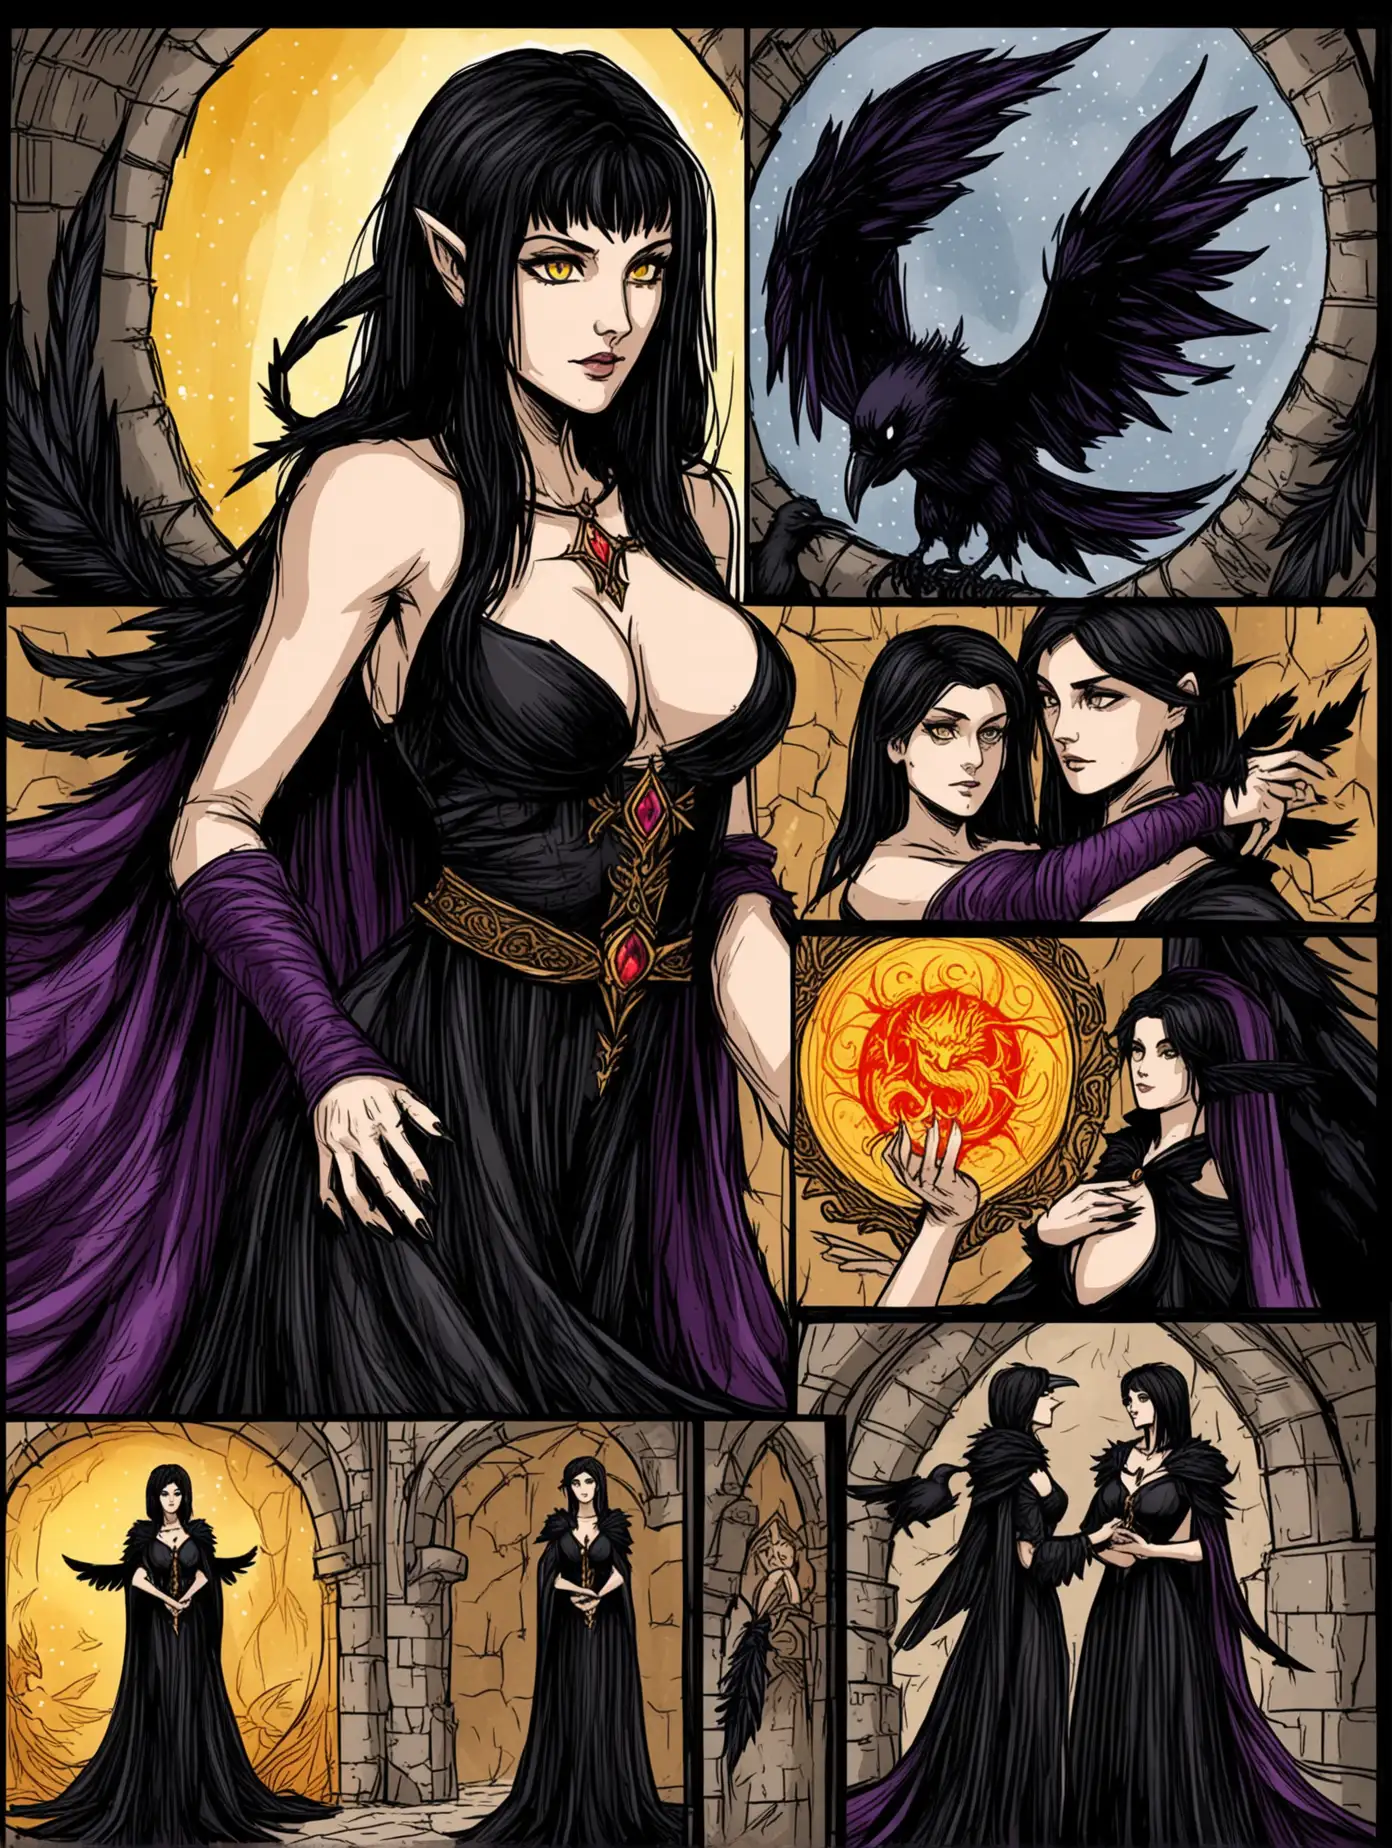 Beautiful-Witch-Morrigan-with-Raven-Feathers-Dress-in-Medieval-Setting